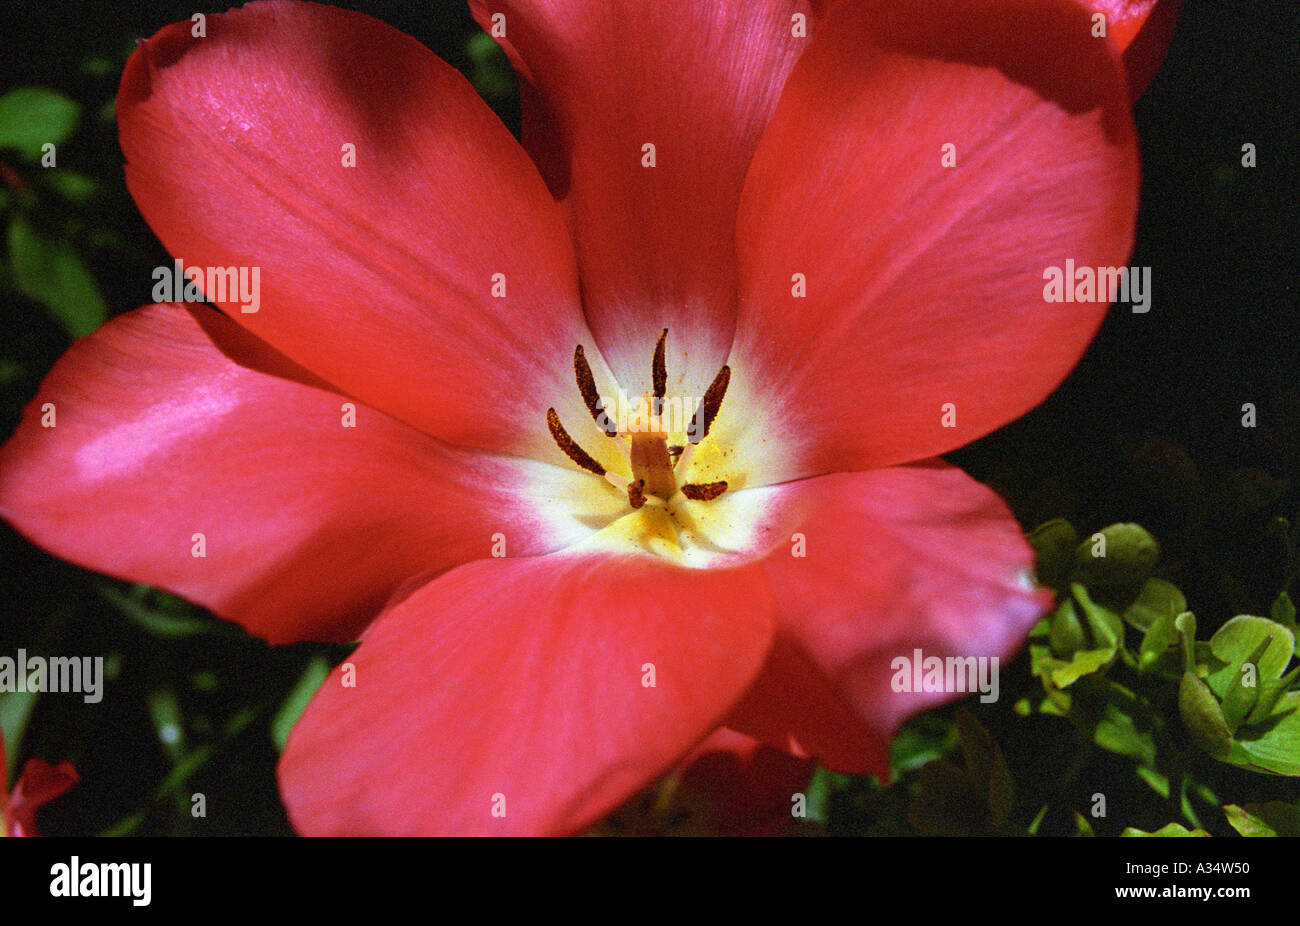 close up of inside pink tulip flower clearly showing flower parts stigma stamens anthers filaments Stock Photo